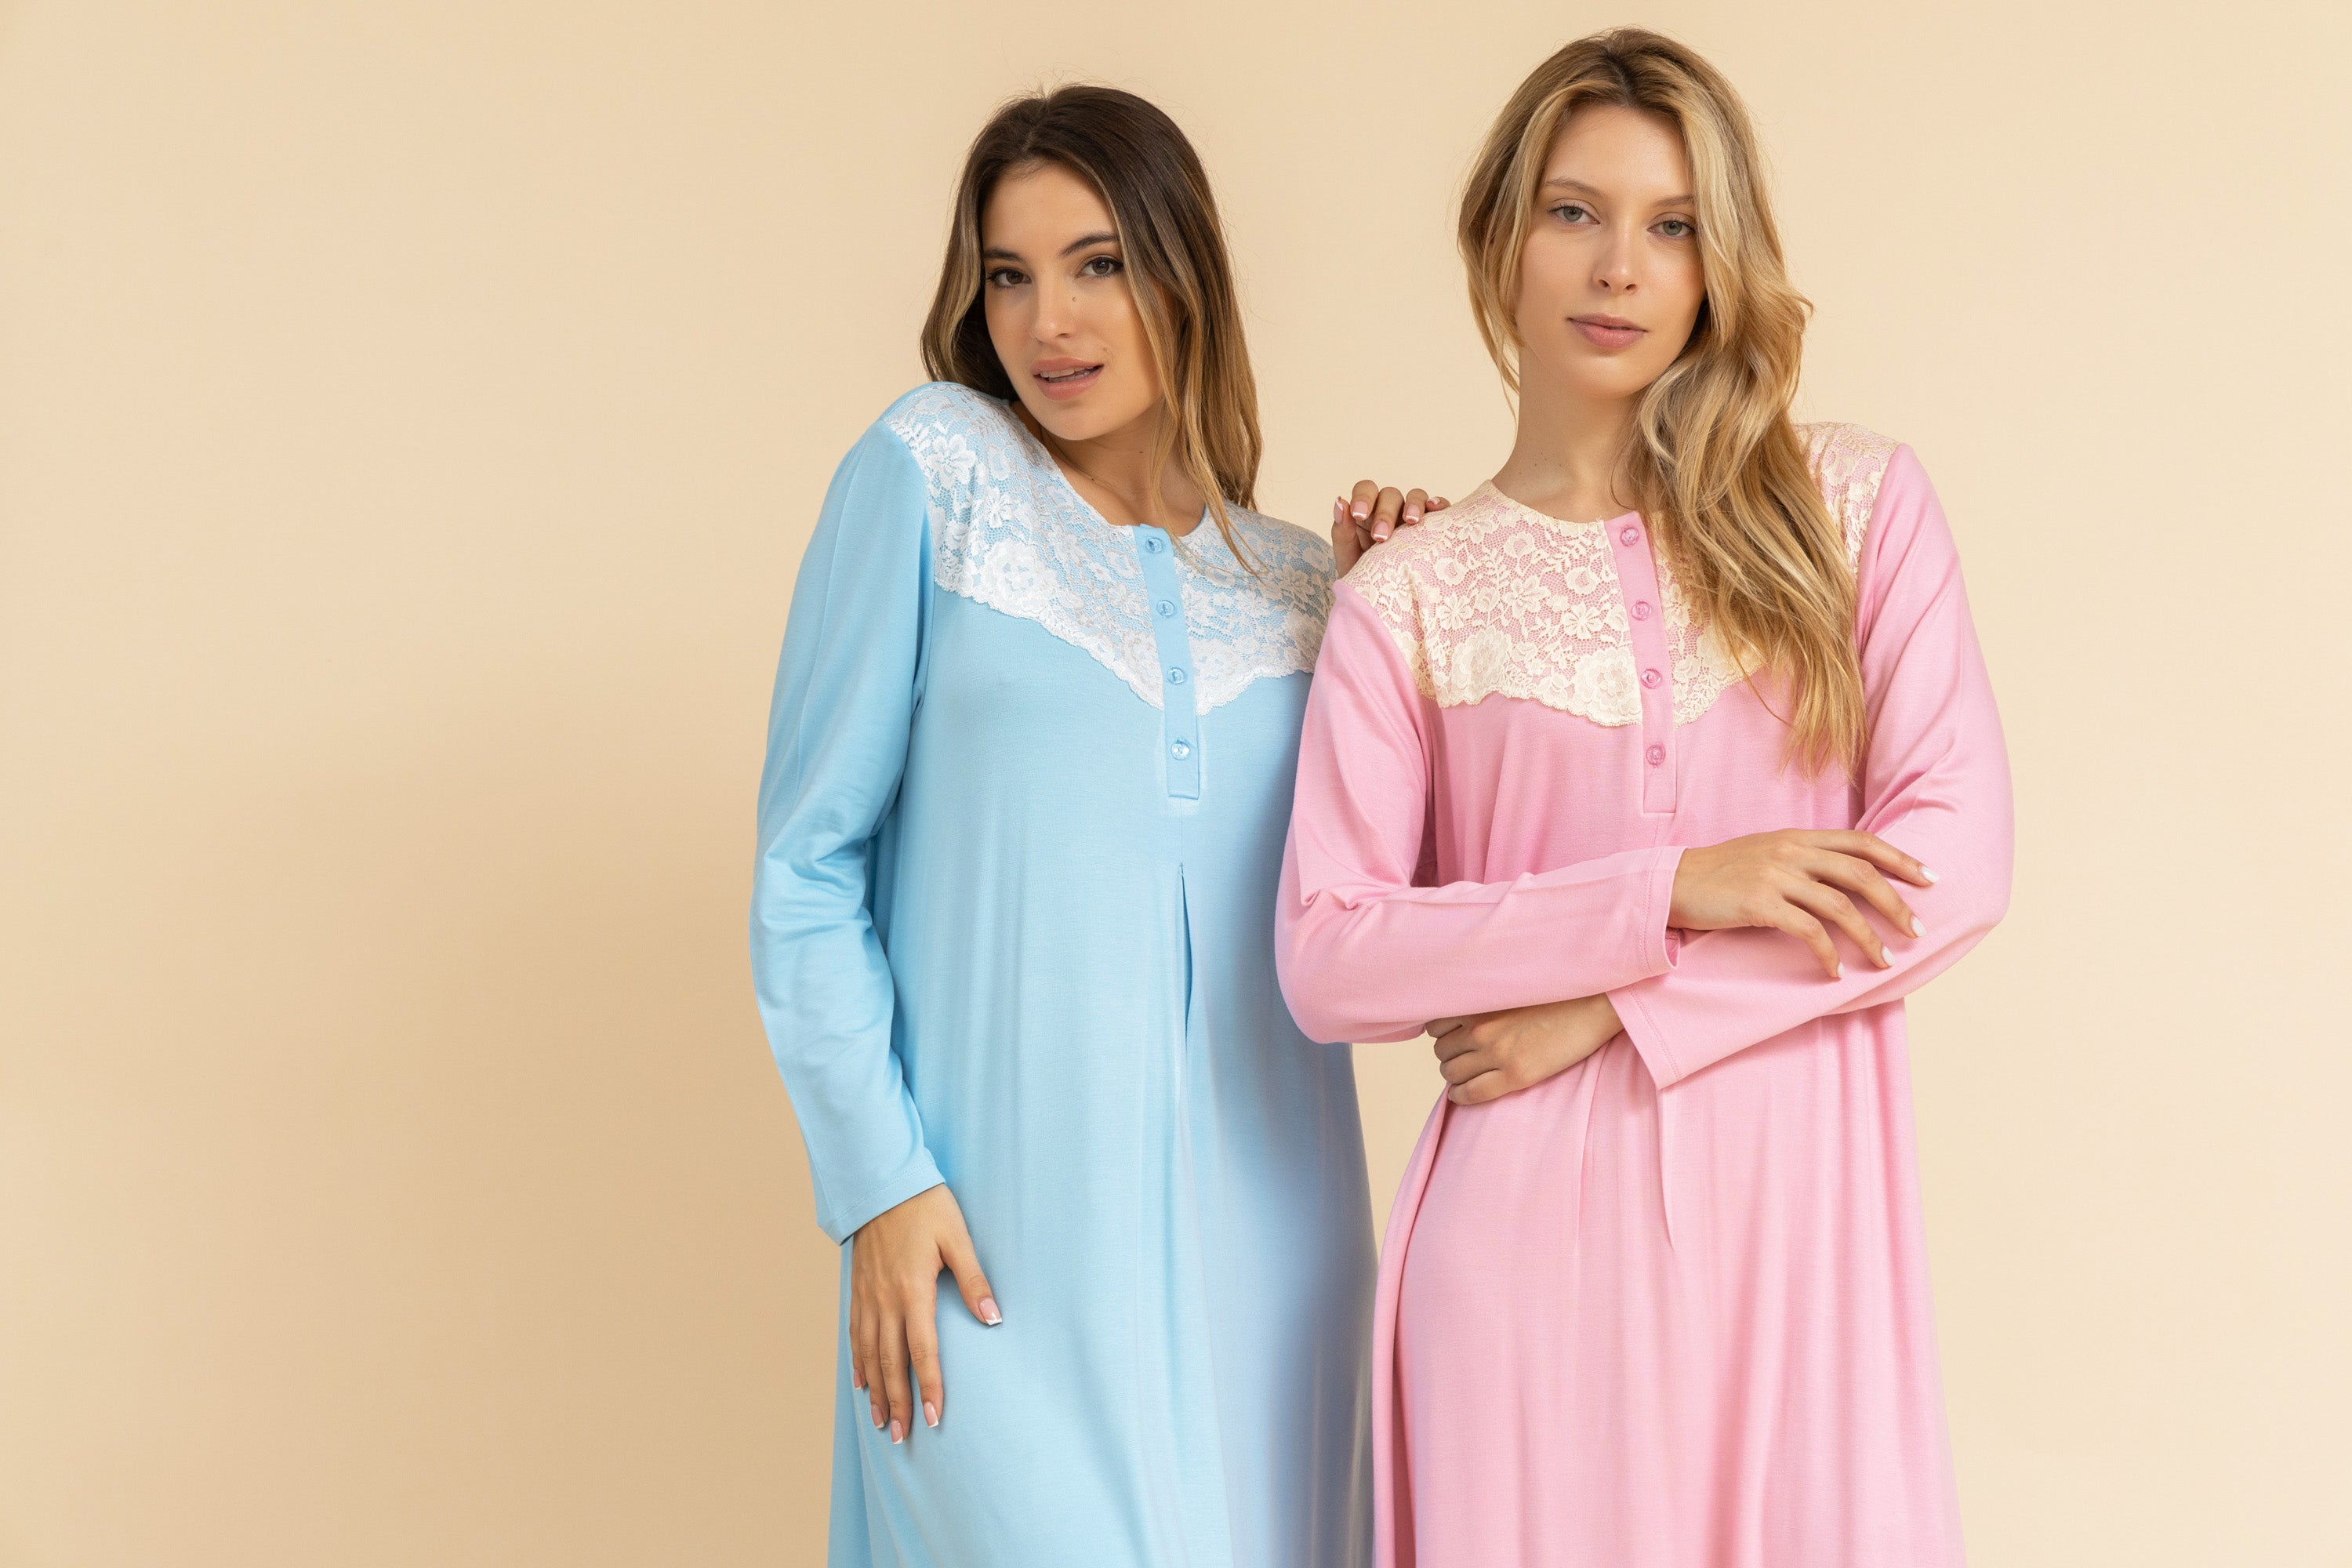 Classic nightgown with buttons and lace detail